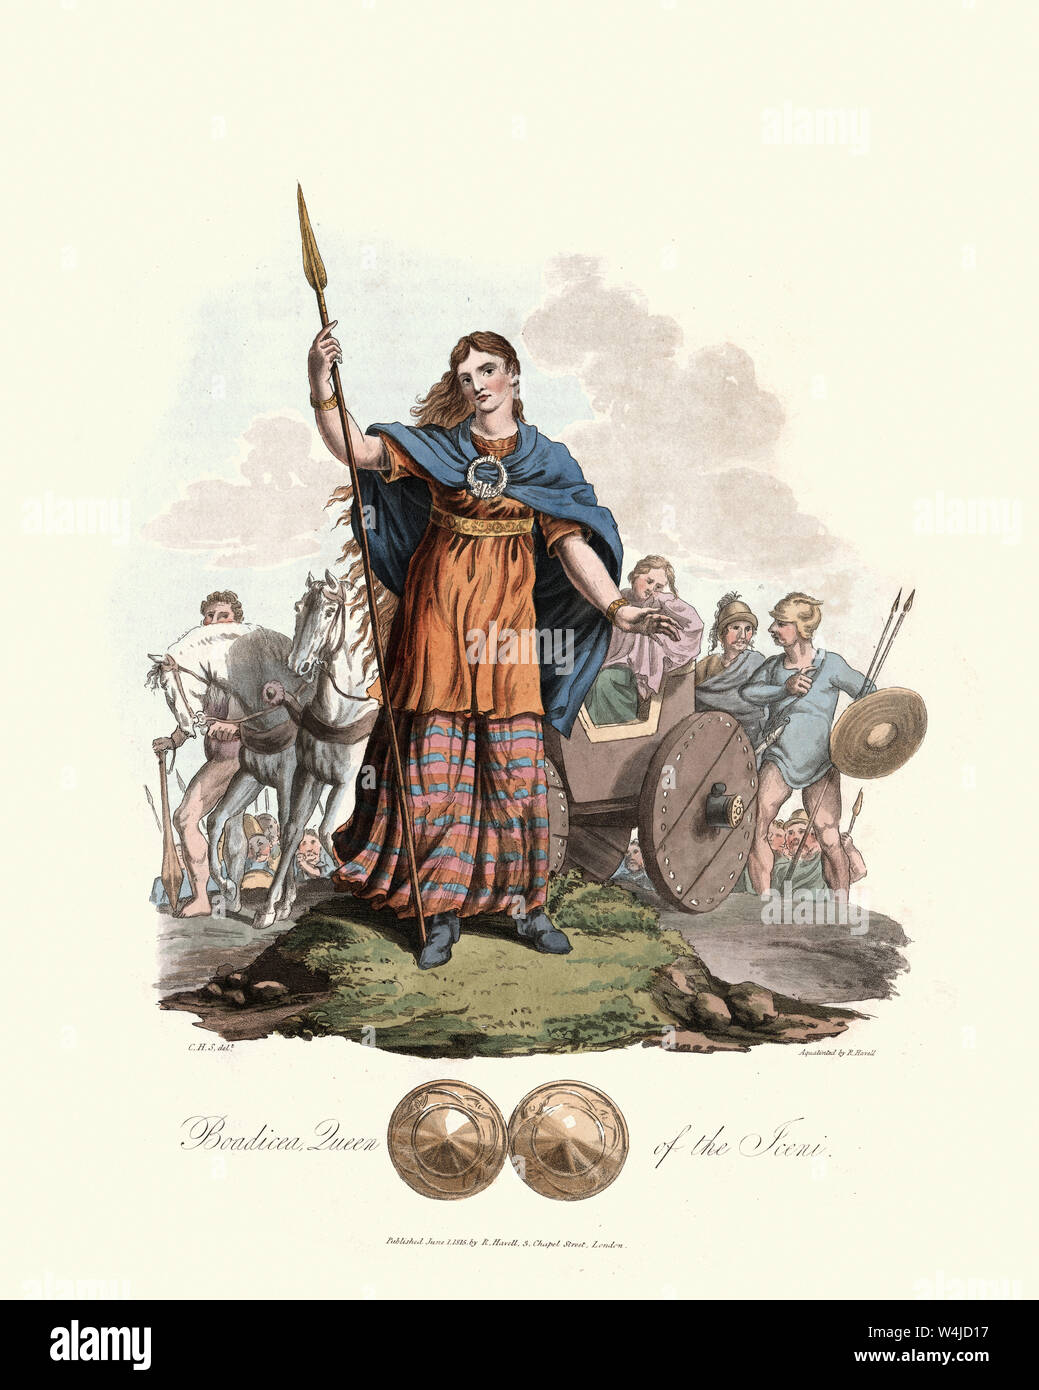 Vintage engraving of Boudica (Boudicca), Queen of the Iceni. 1815, The Costume of the Original Inhabitants of the British Islands, by MEYRICK, Samuel Stock Photo